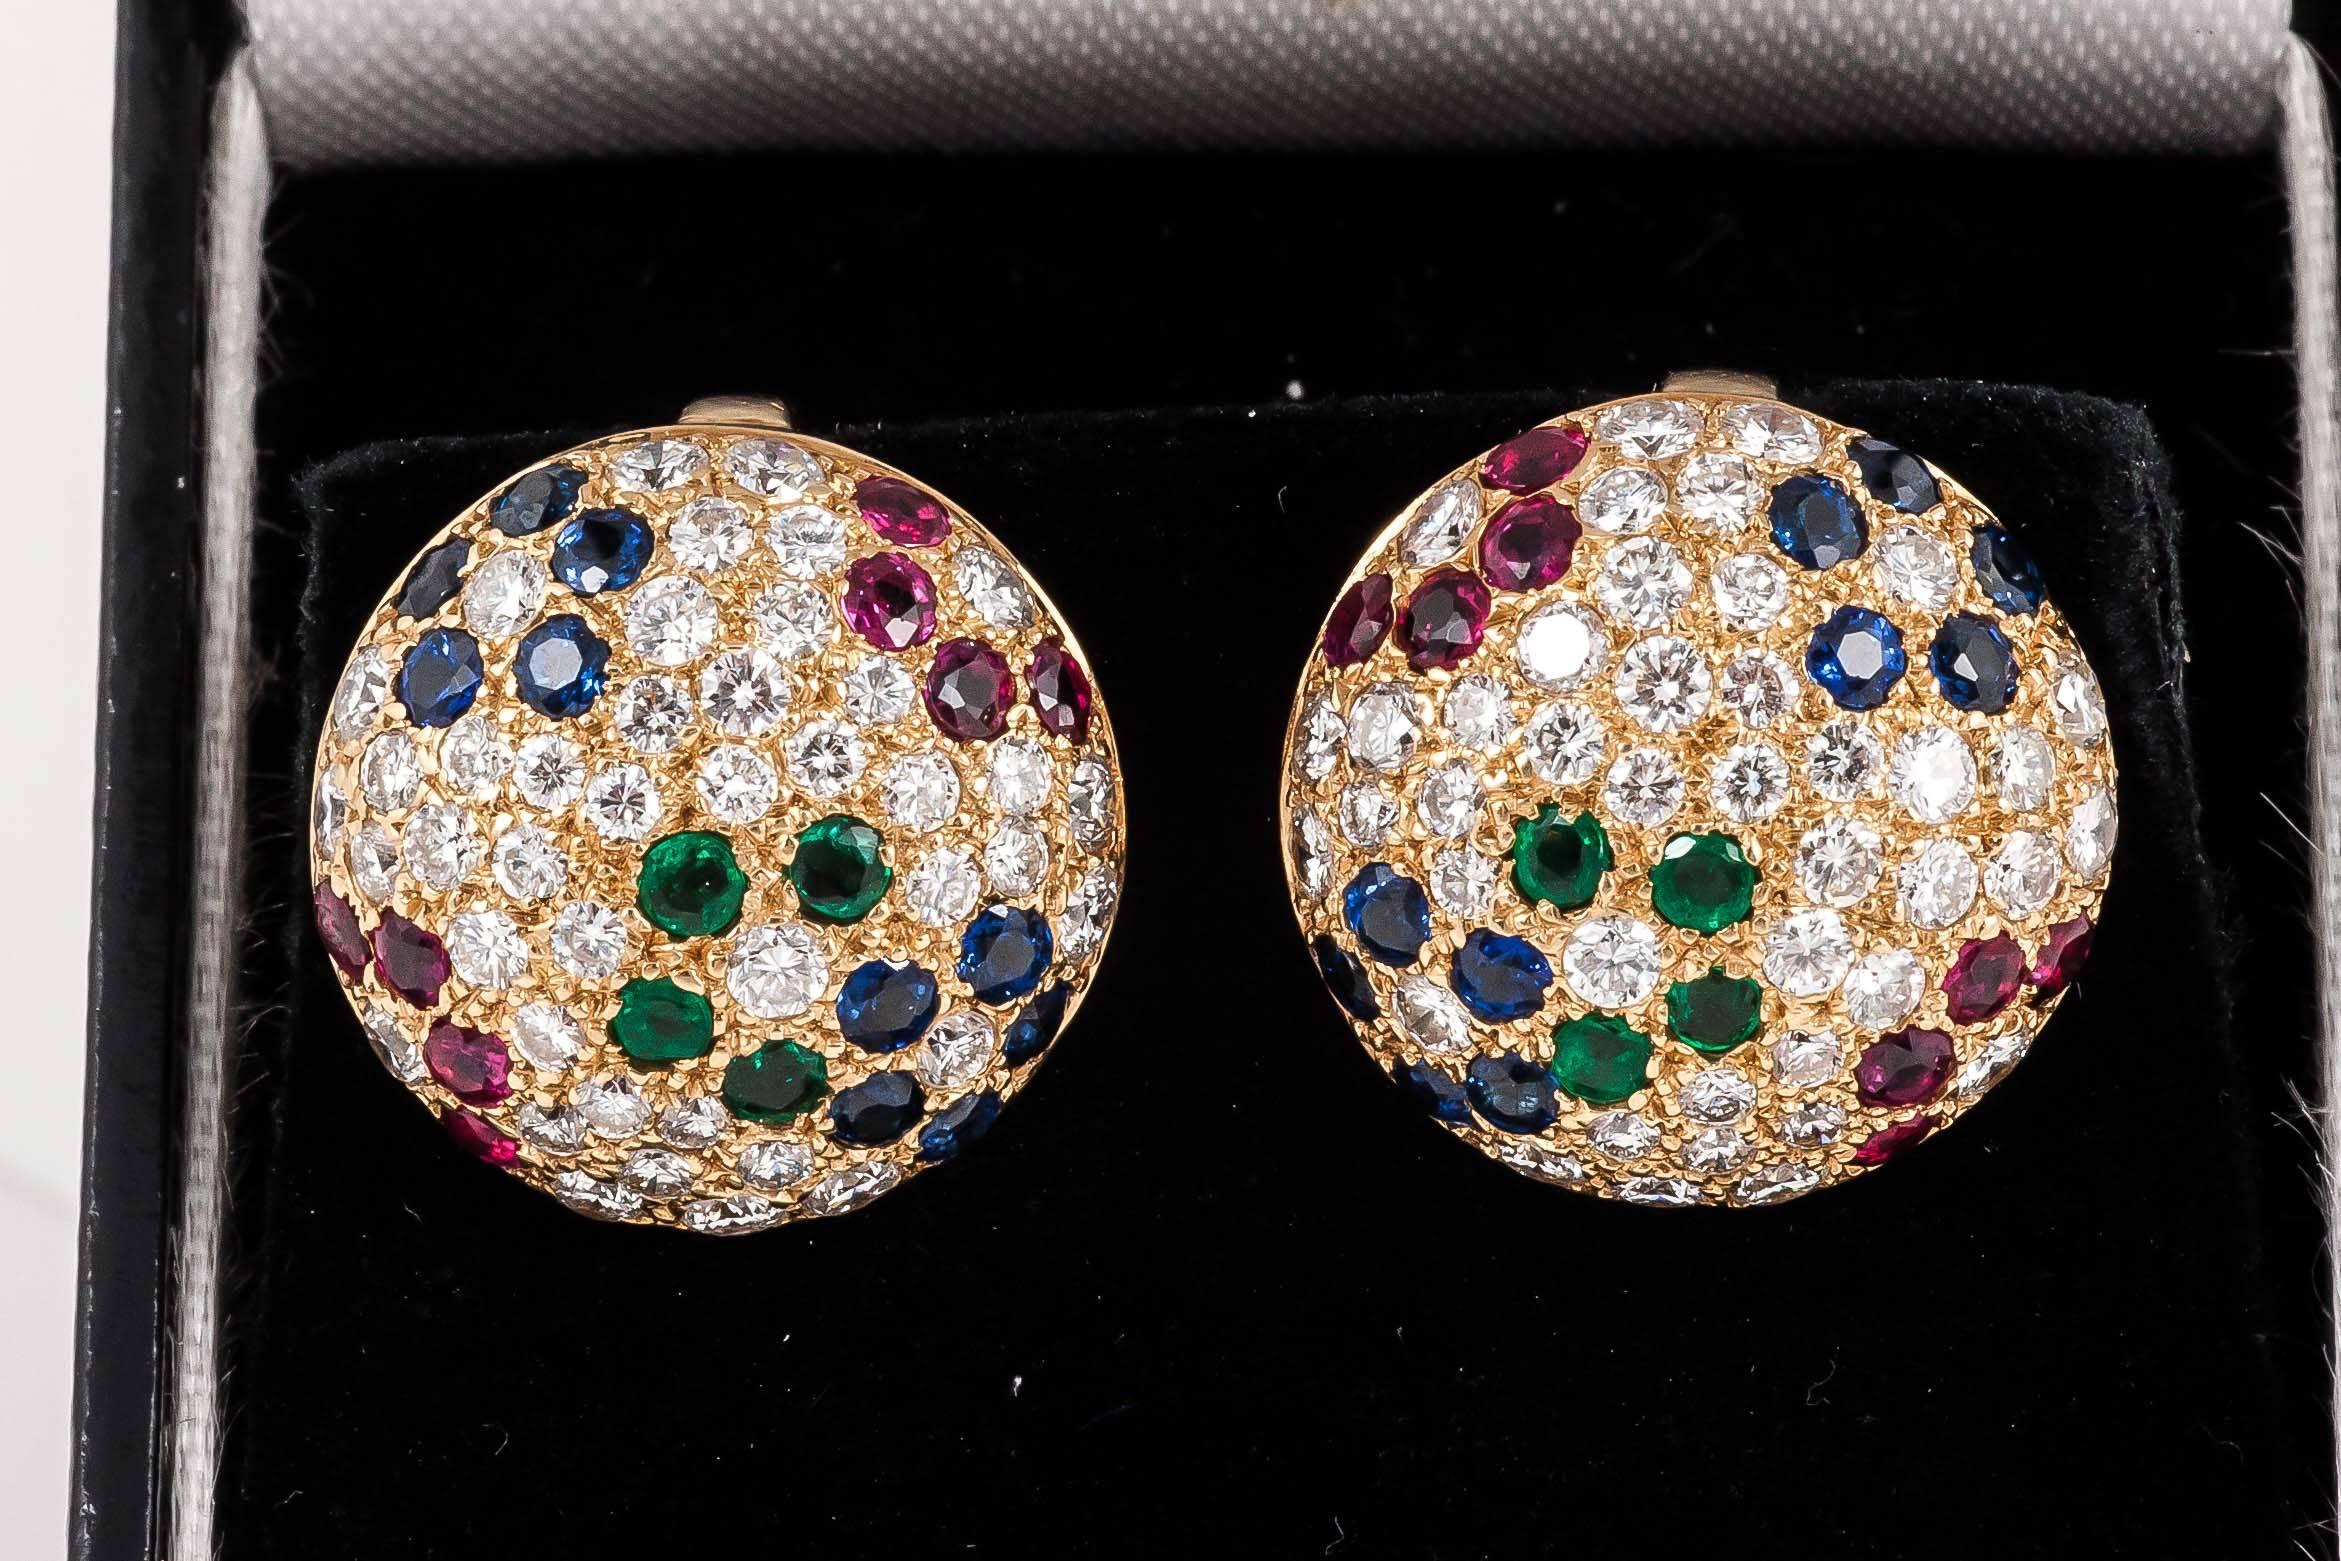 A fine quality pair of 18ct yellow gold mounted,bombe shaped earrings,set with bright coloured,rubies,emeralds,sapphires,and brilliant cut diamonds,c,1980;s.stamped 18kt and France